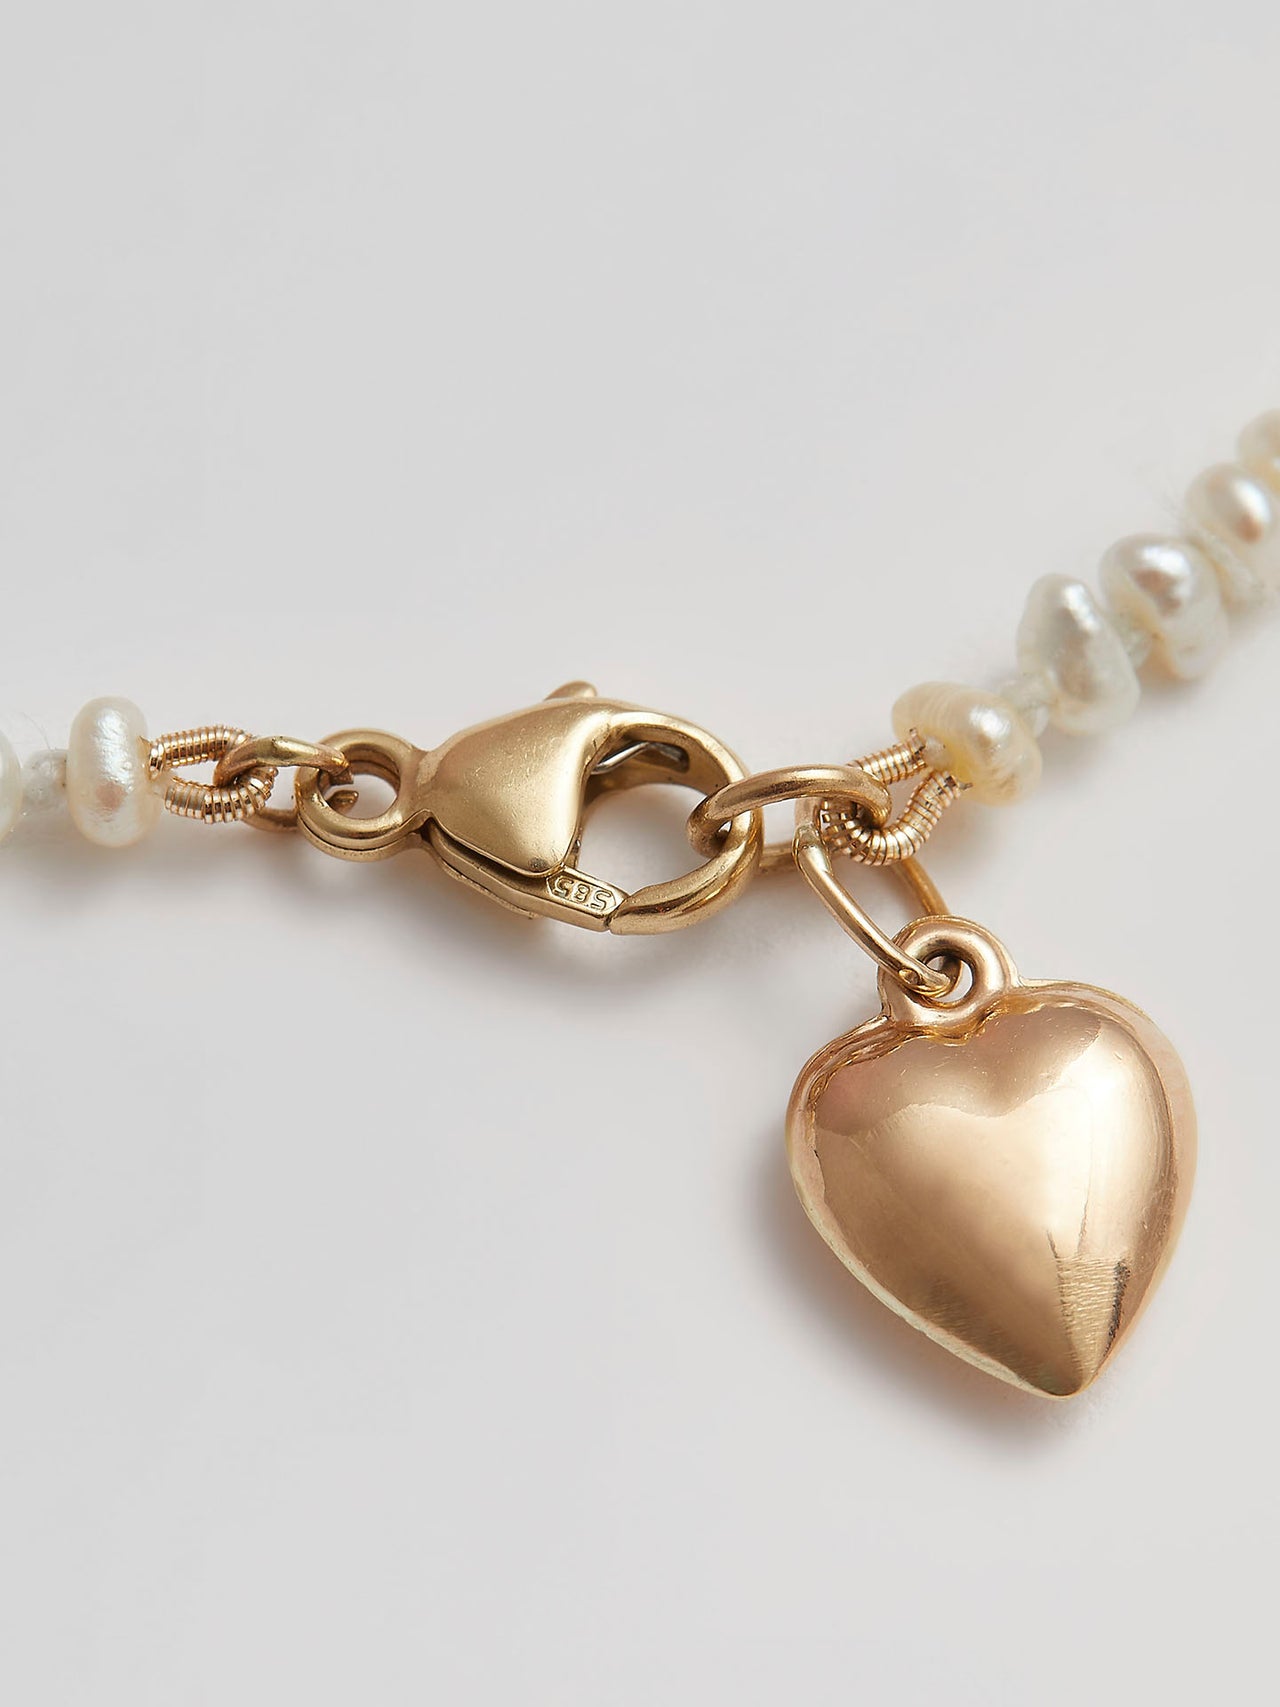 Close up of Clasp and Gold Heart Pendant on Puff Love Choker